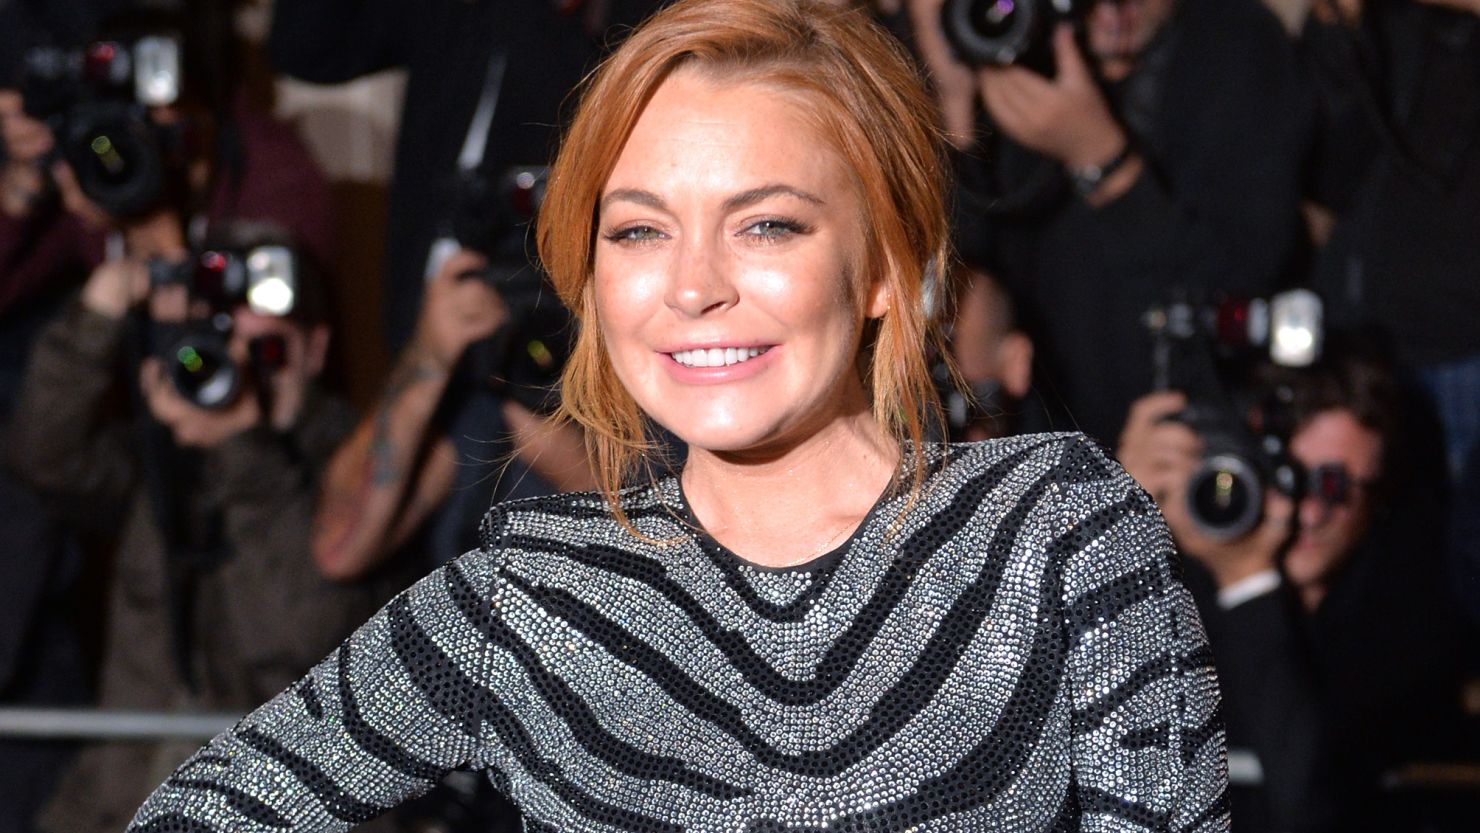 Lindsay Lohan's performance in a David Mamet play in London has been criticized as "shaky."